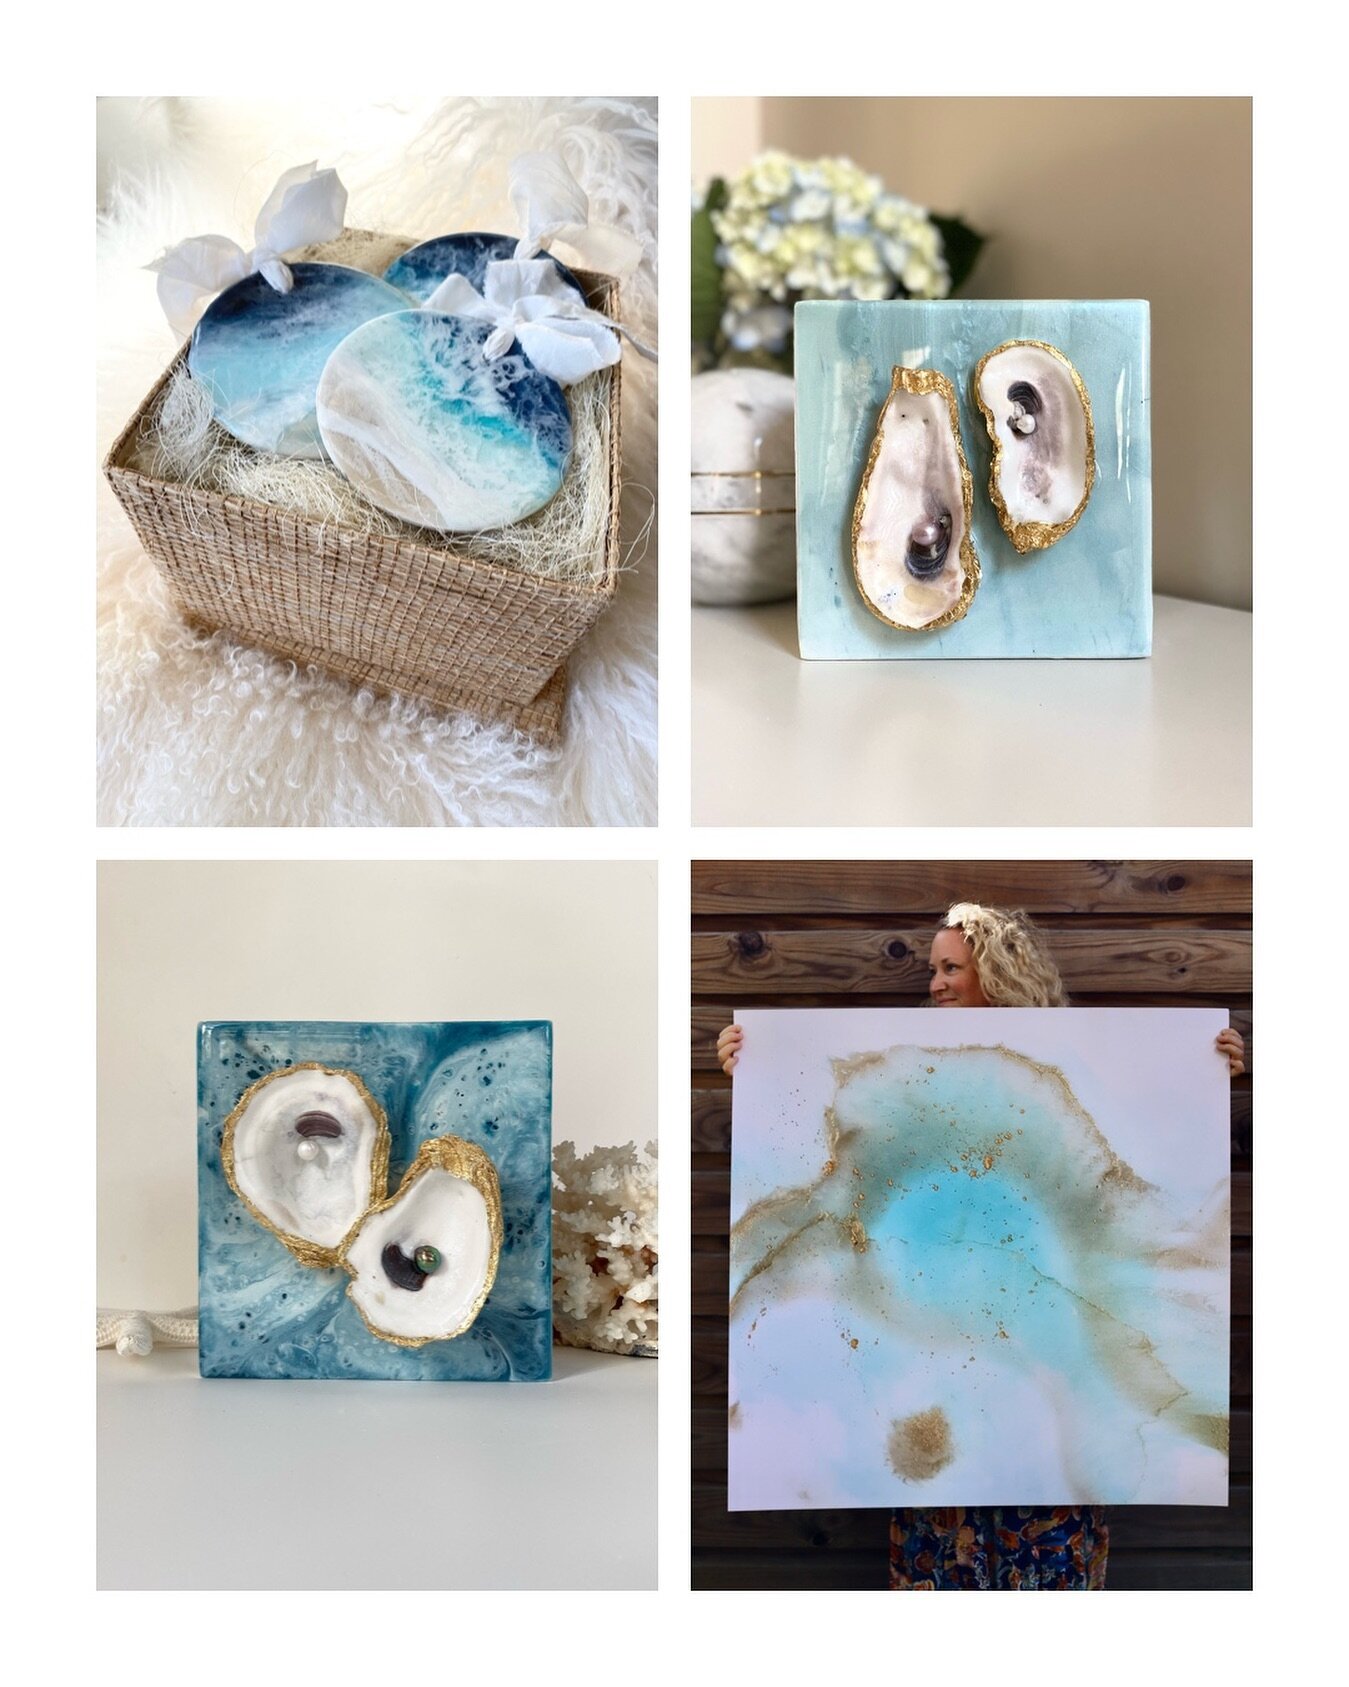 There&rsquo;s a 20% off sale happening right now on my website and in Stories! It&rsquo;s the only sale I offer throughout the year, and the perfect opportunity to snatch that painting/print/ornament you&rsquo;ve had your eye on. 💕😉

Discount autom